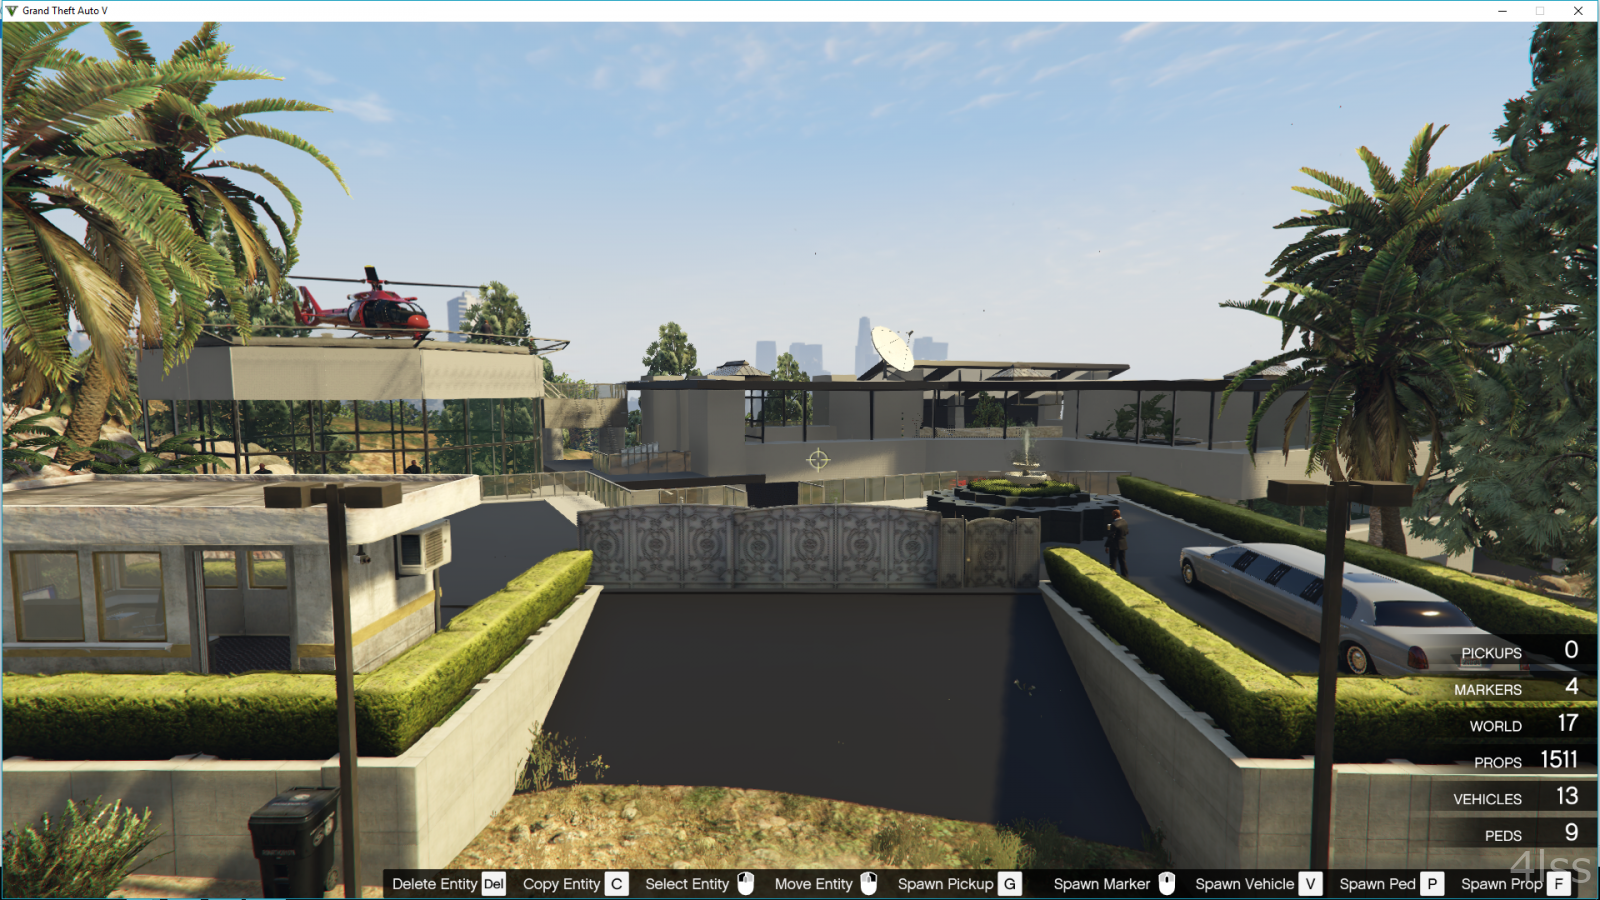 Most Expensive House In Gta 5 Online Most Expensive House in Los Santos [Map Editor] - GTA5-Mods.com